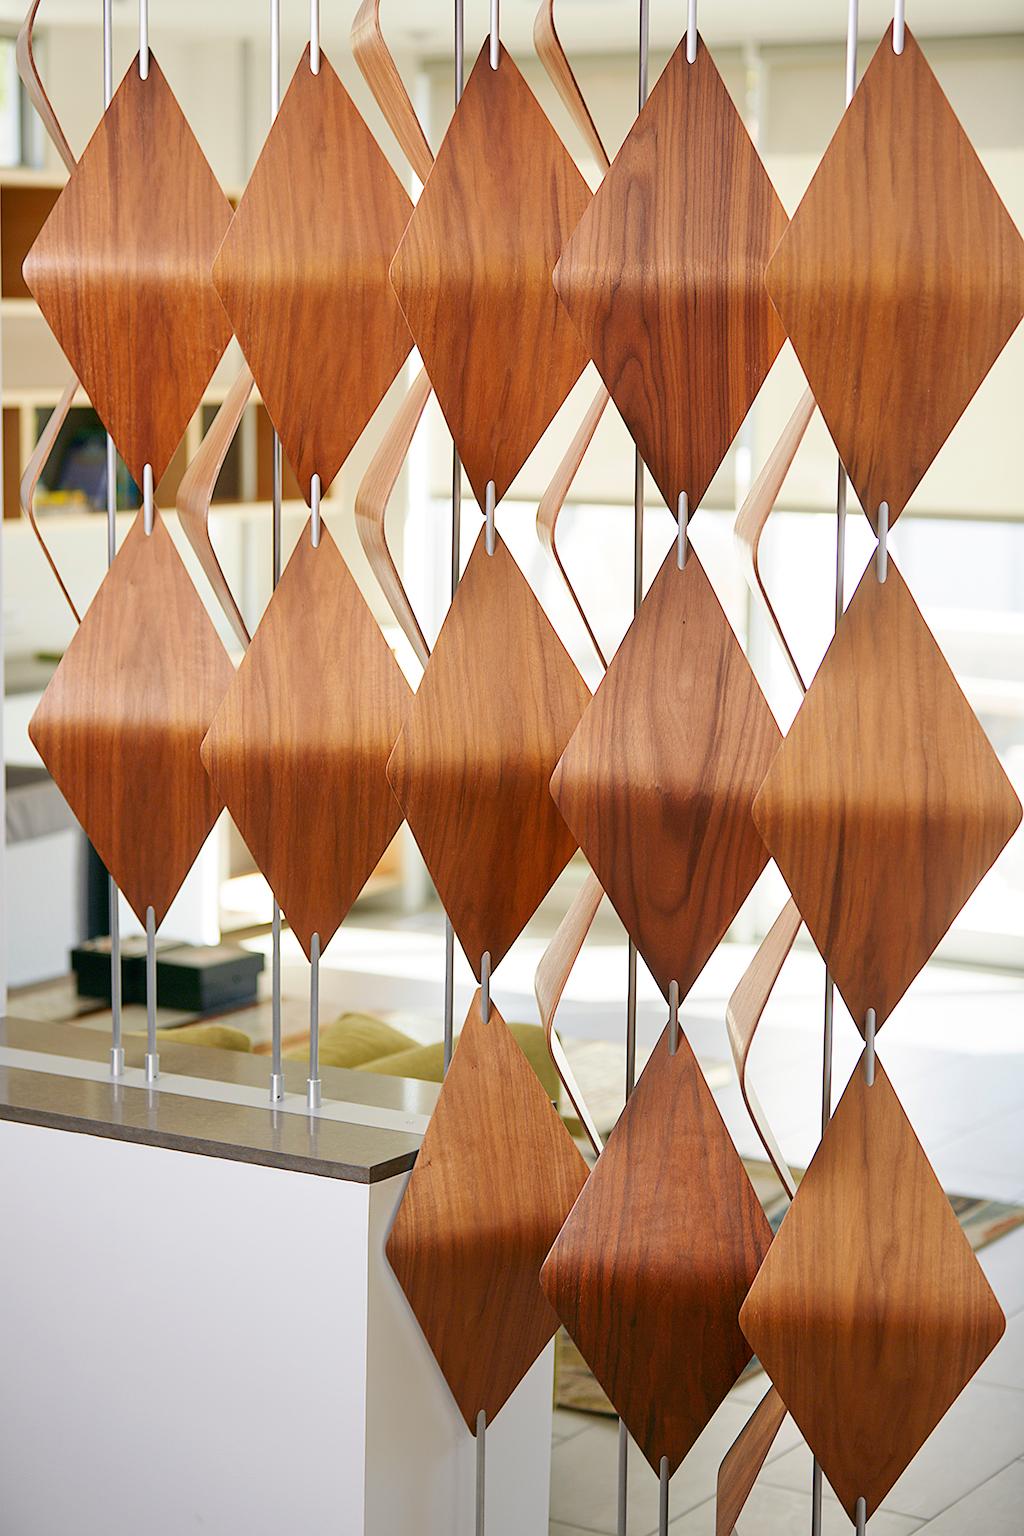 The walnut window shades are an exploration of three dimensional tessellations; giving a flat pattern form. The shades hide and reveal what is behind through a simple rotation of each bar. When situated in front of a window they register different